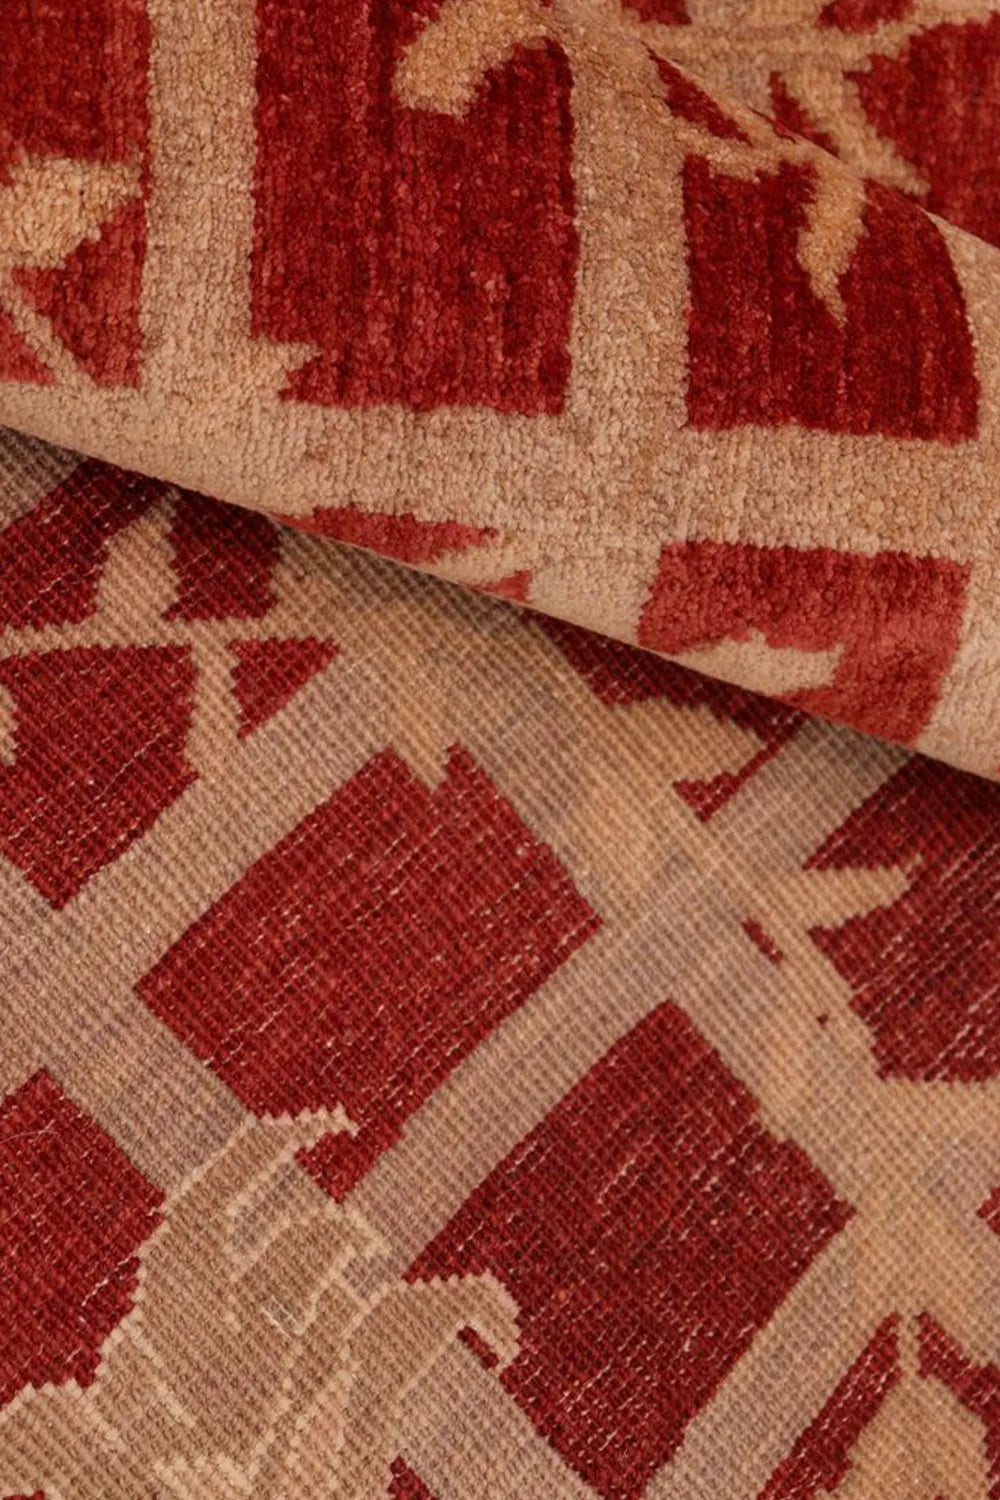 Classic wool rug featuring a red and brown nature-inspired design.